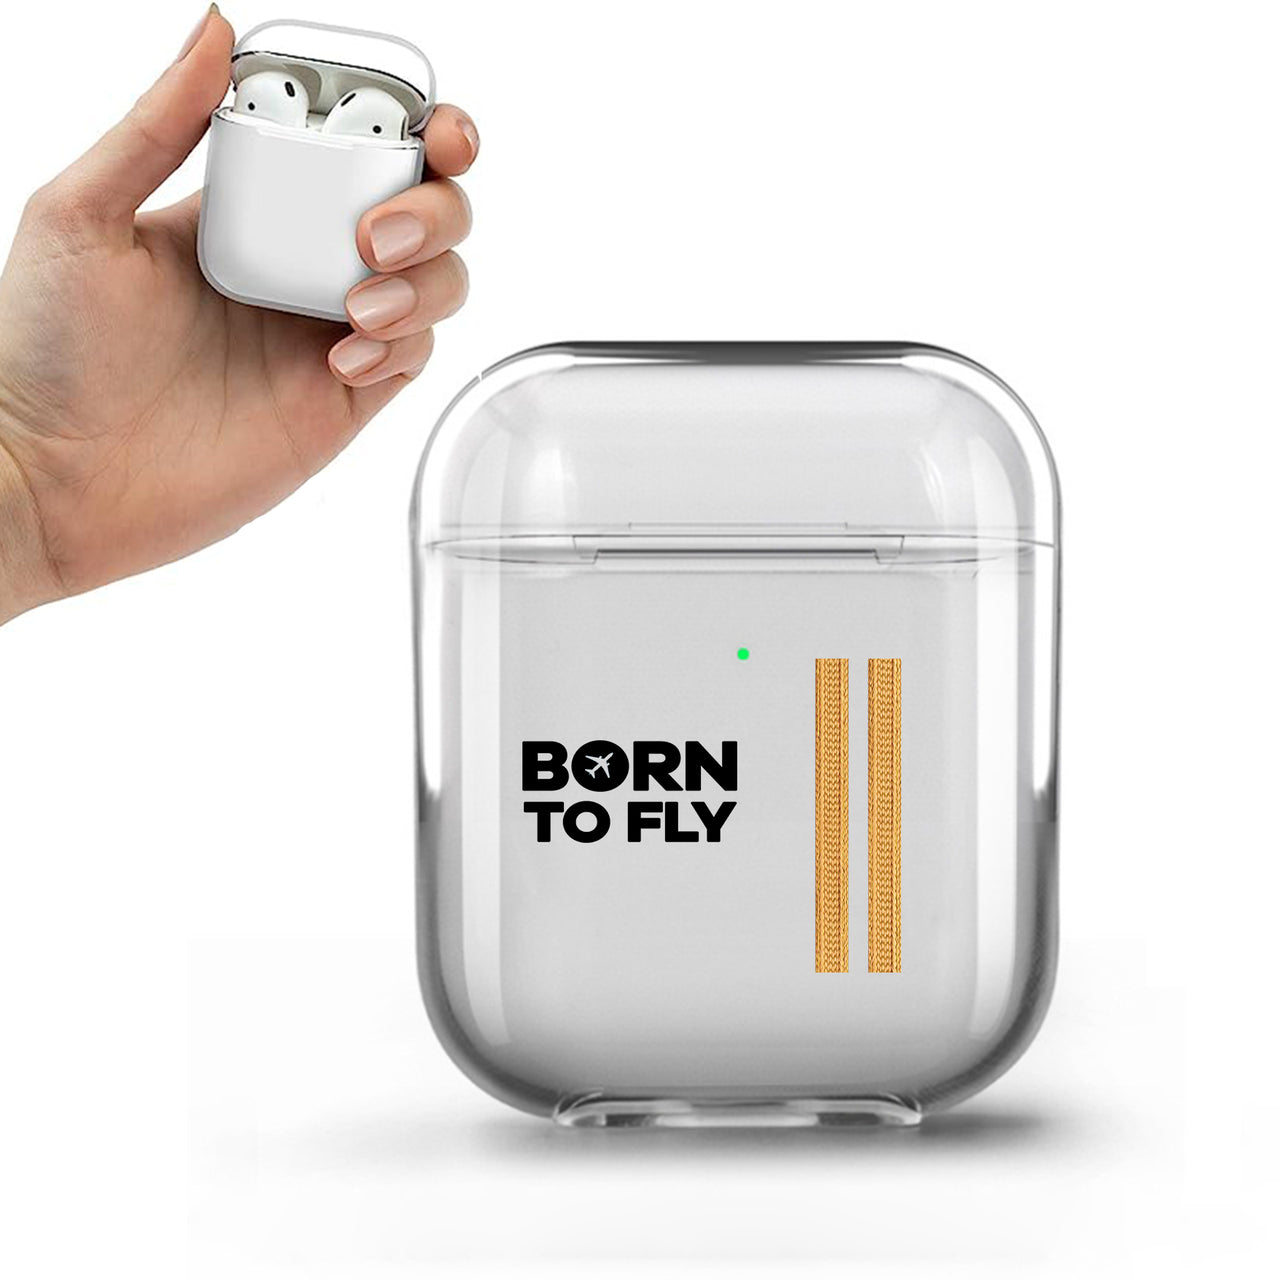 Born to Fly & Pilot Epaulettes (4,3,2 Lines) Designed Transparent Earphone AirPods Cases